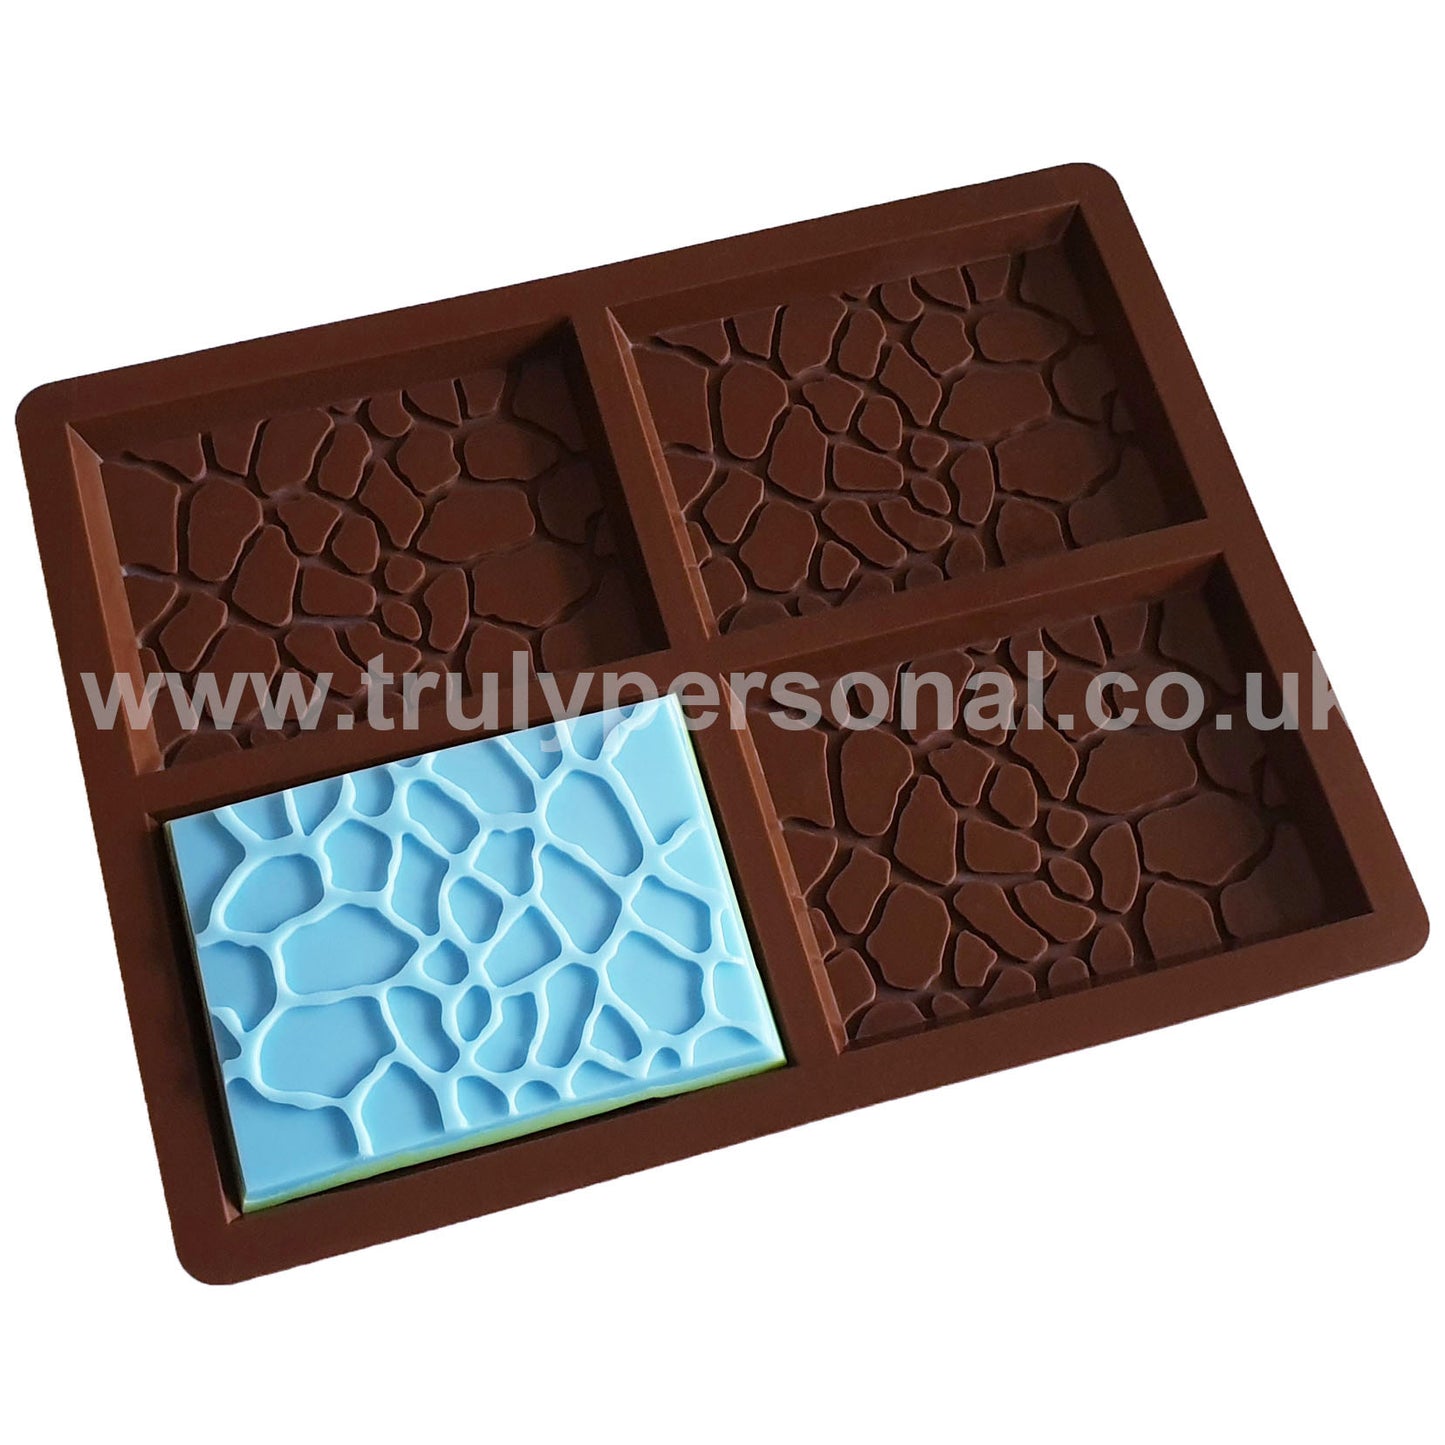 Giraffe Bar Silicone Mould - 4 Cell | Wax Melts | Truly Personal Ltd